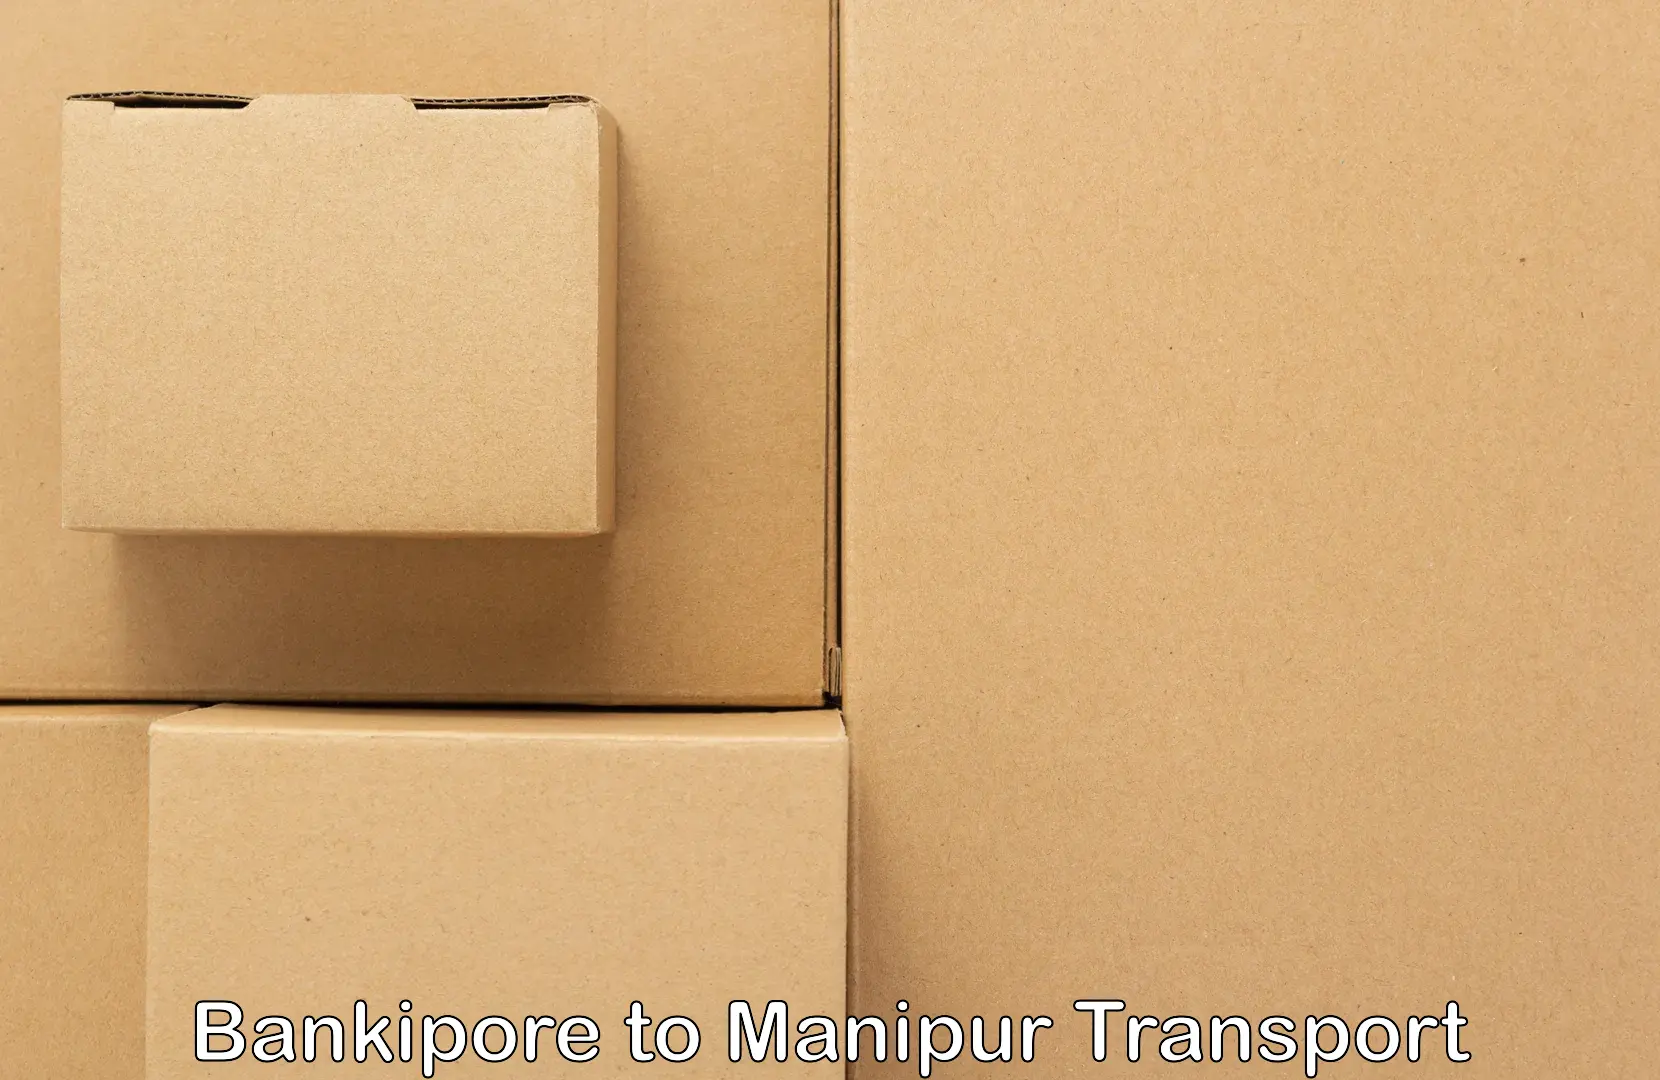 Nearest transport service Bankipore to Manipur